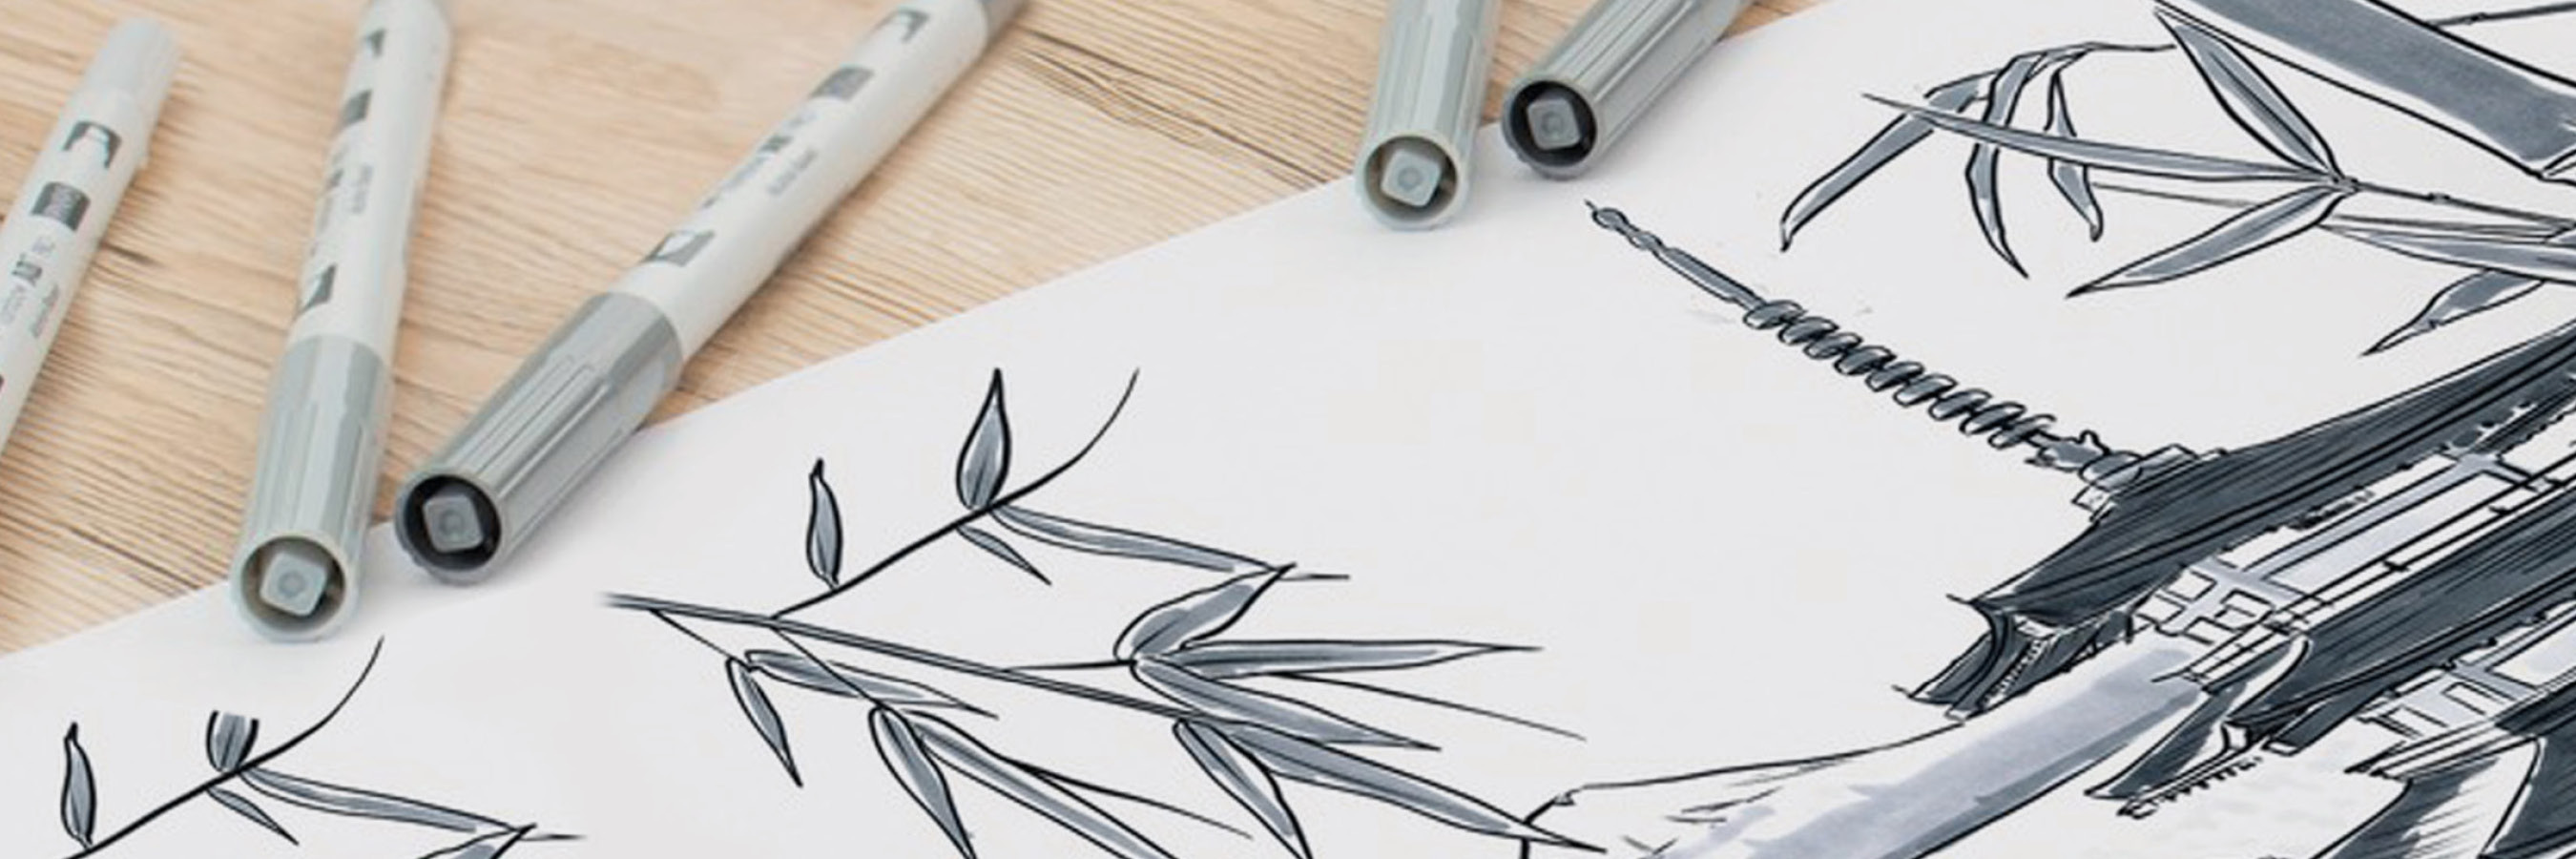 Get started with brush pens